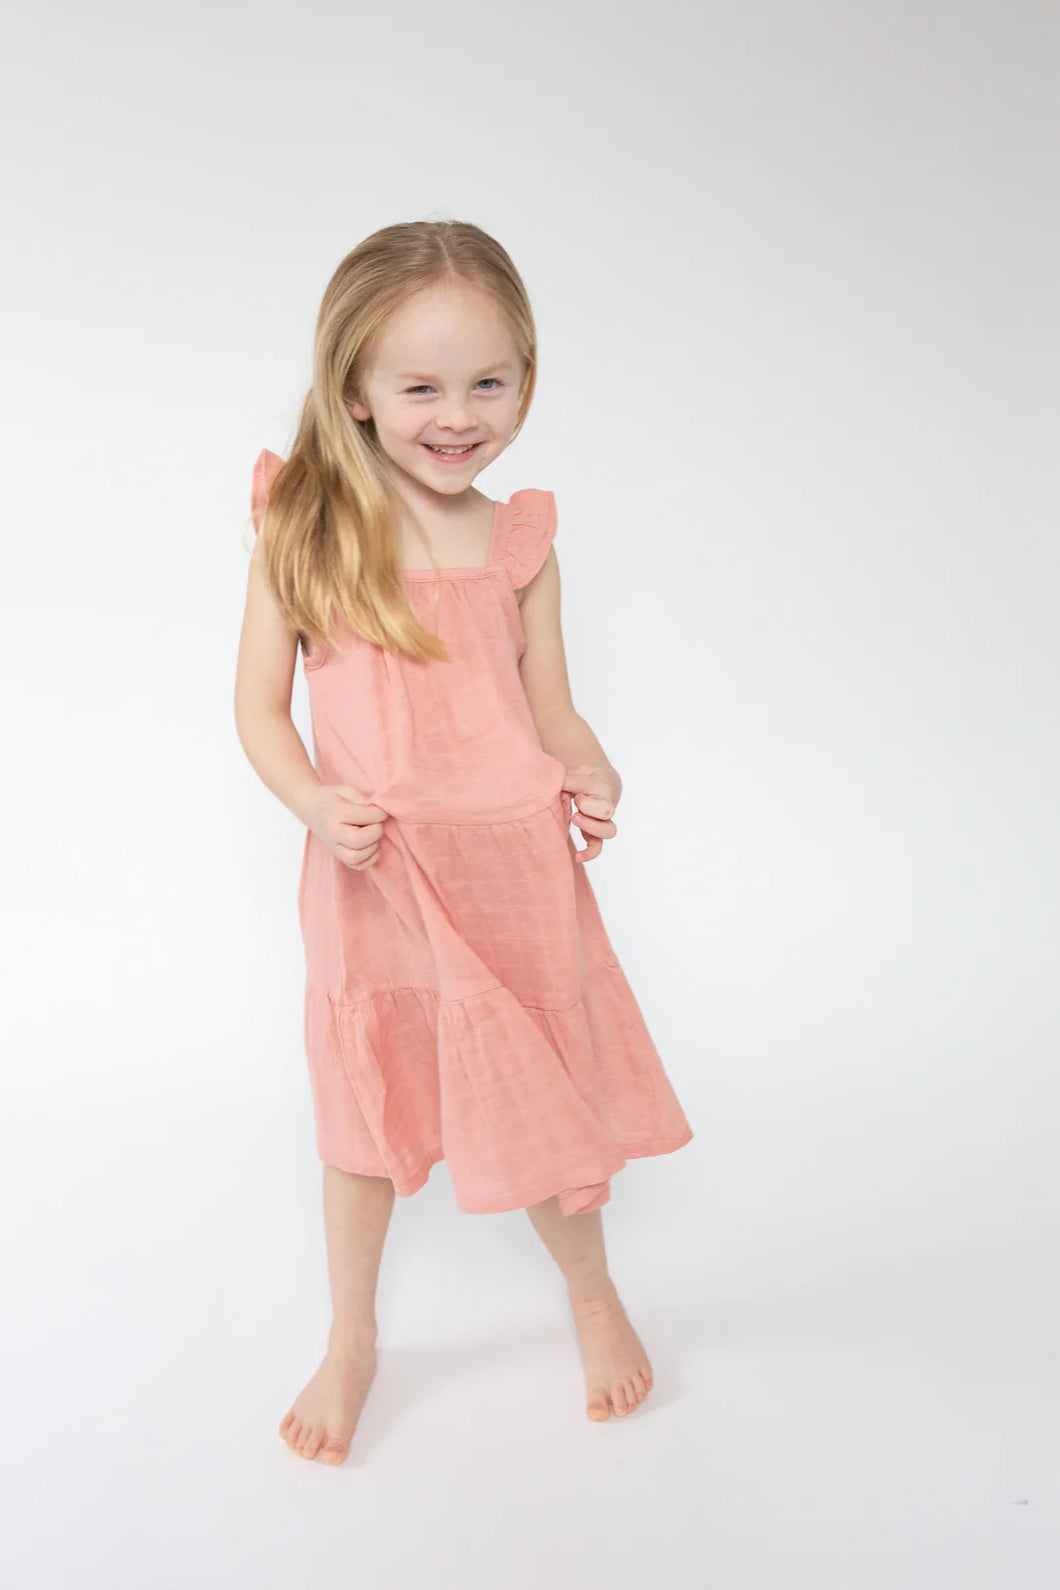 The Angel Dear Twirly Sundress and diaper cover from Magnolia & Oak: Abilene's Premier Children's clothing boutique. 